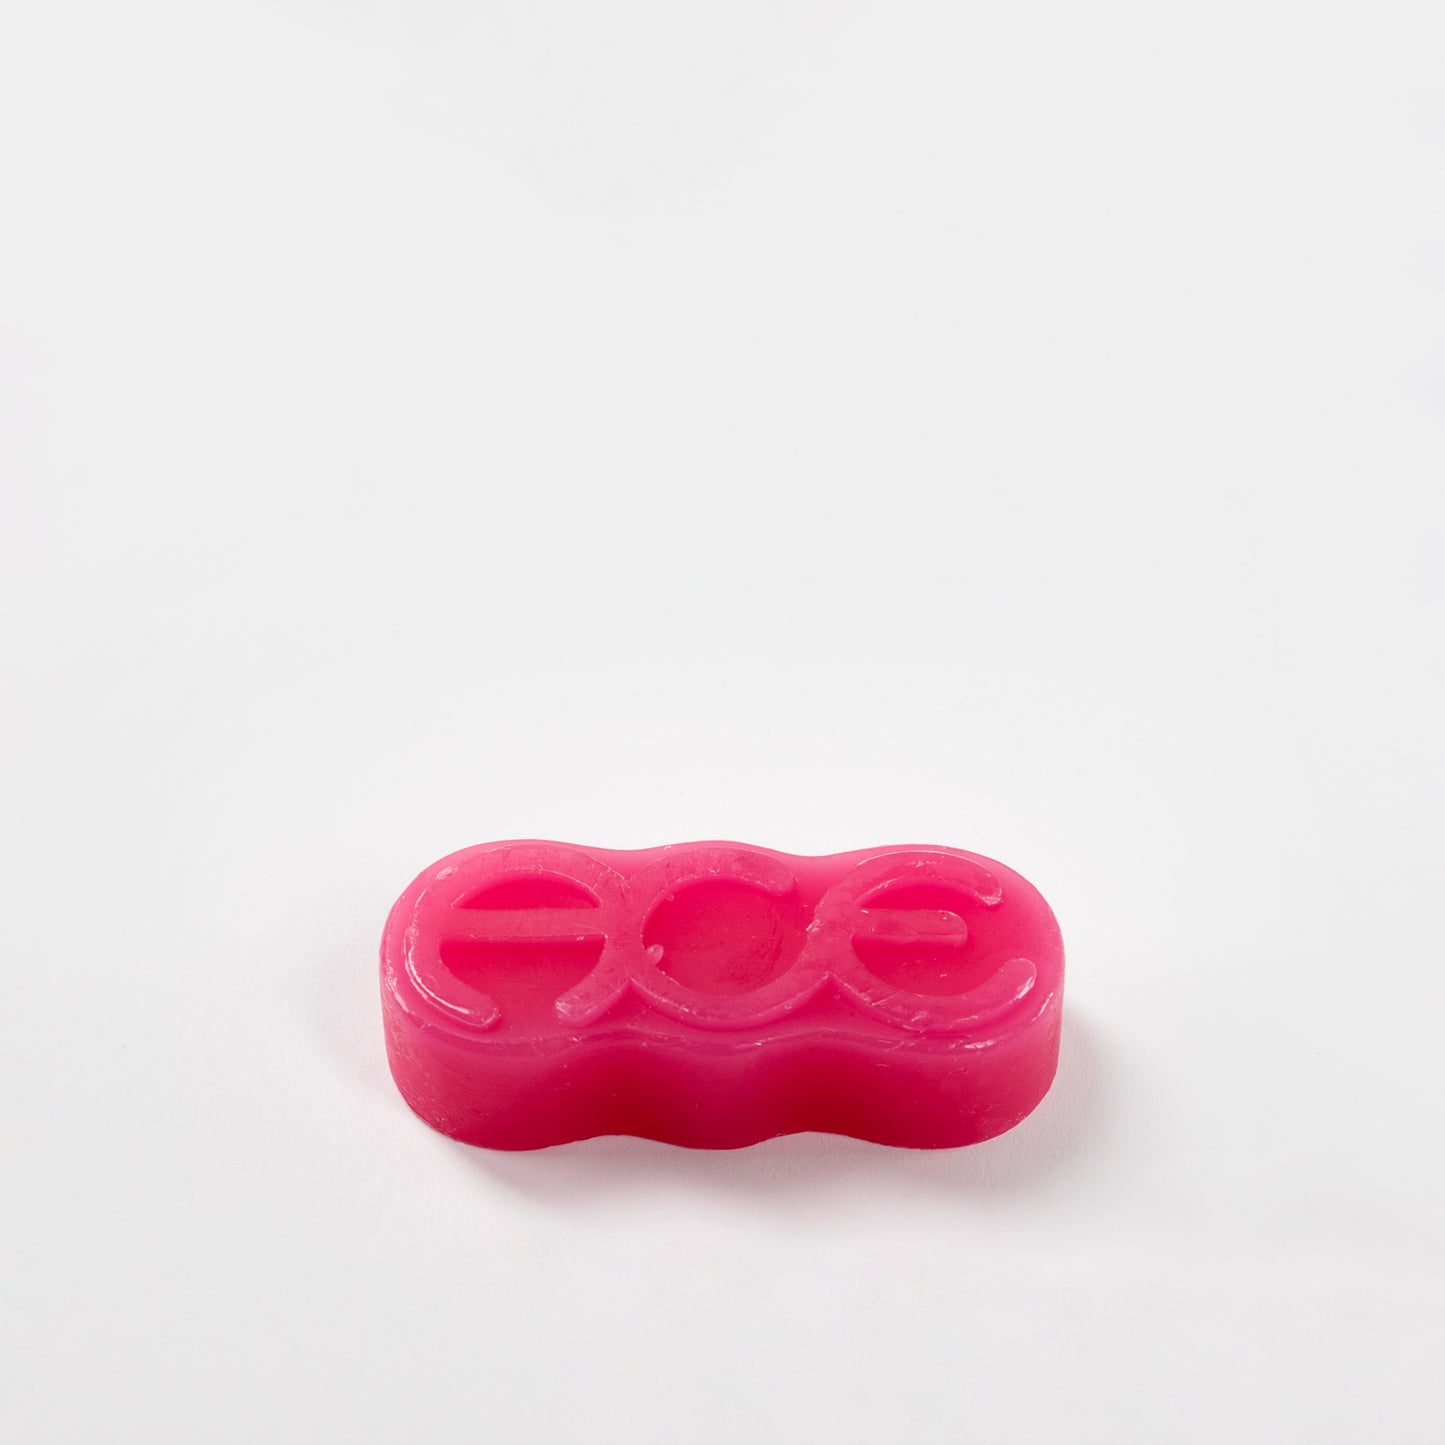 Ace Wax Rings - Pink, available at Prime Delux Store, Plymouth, Devon.